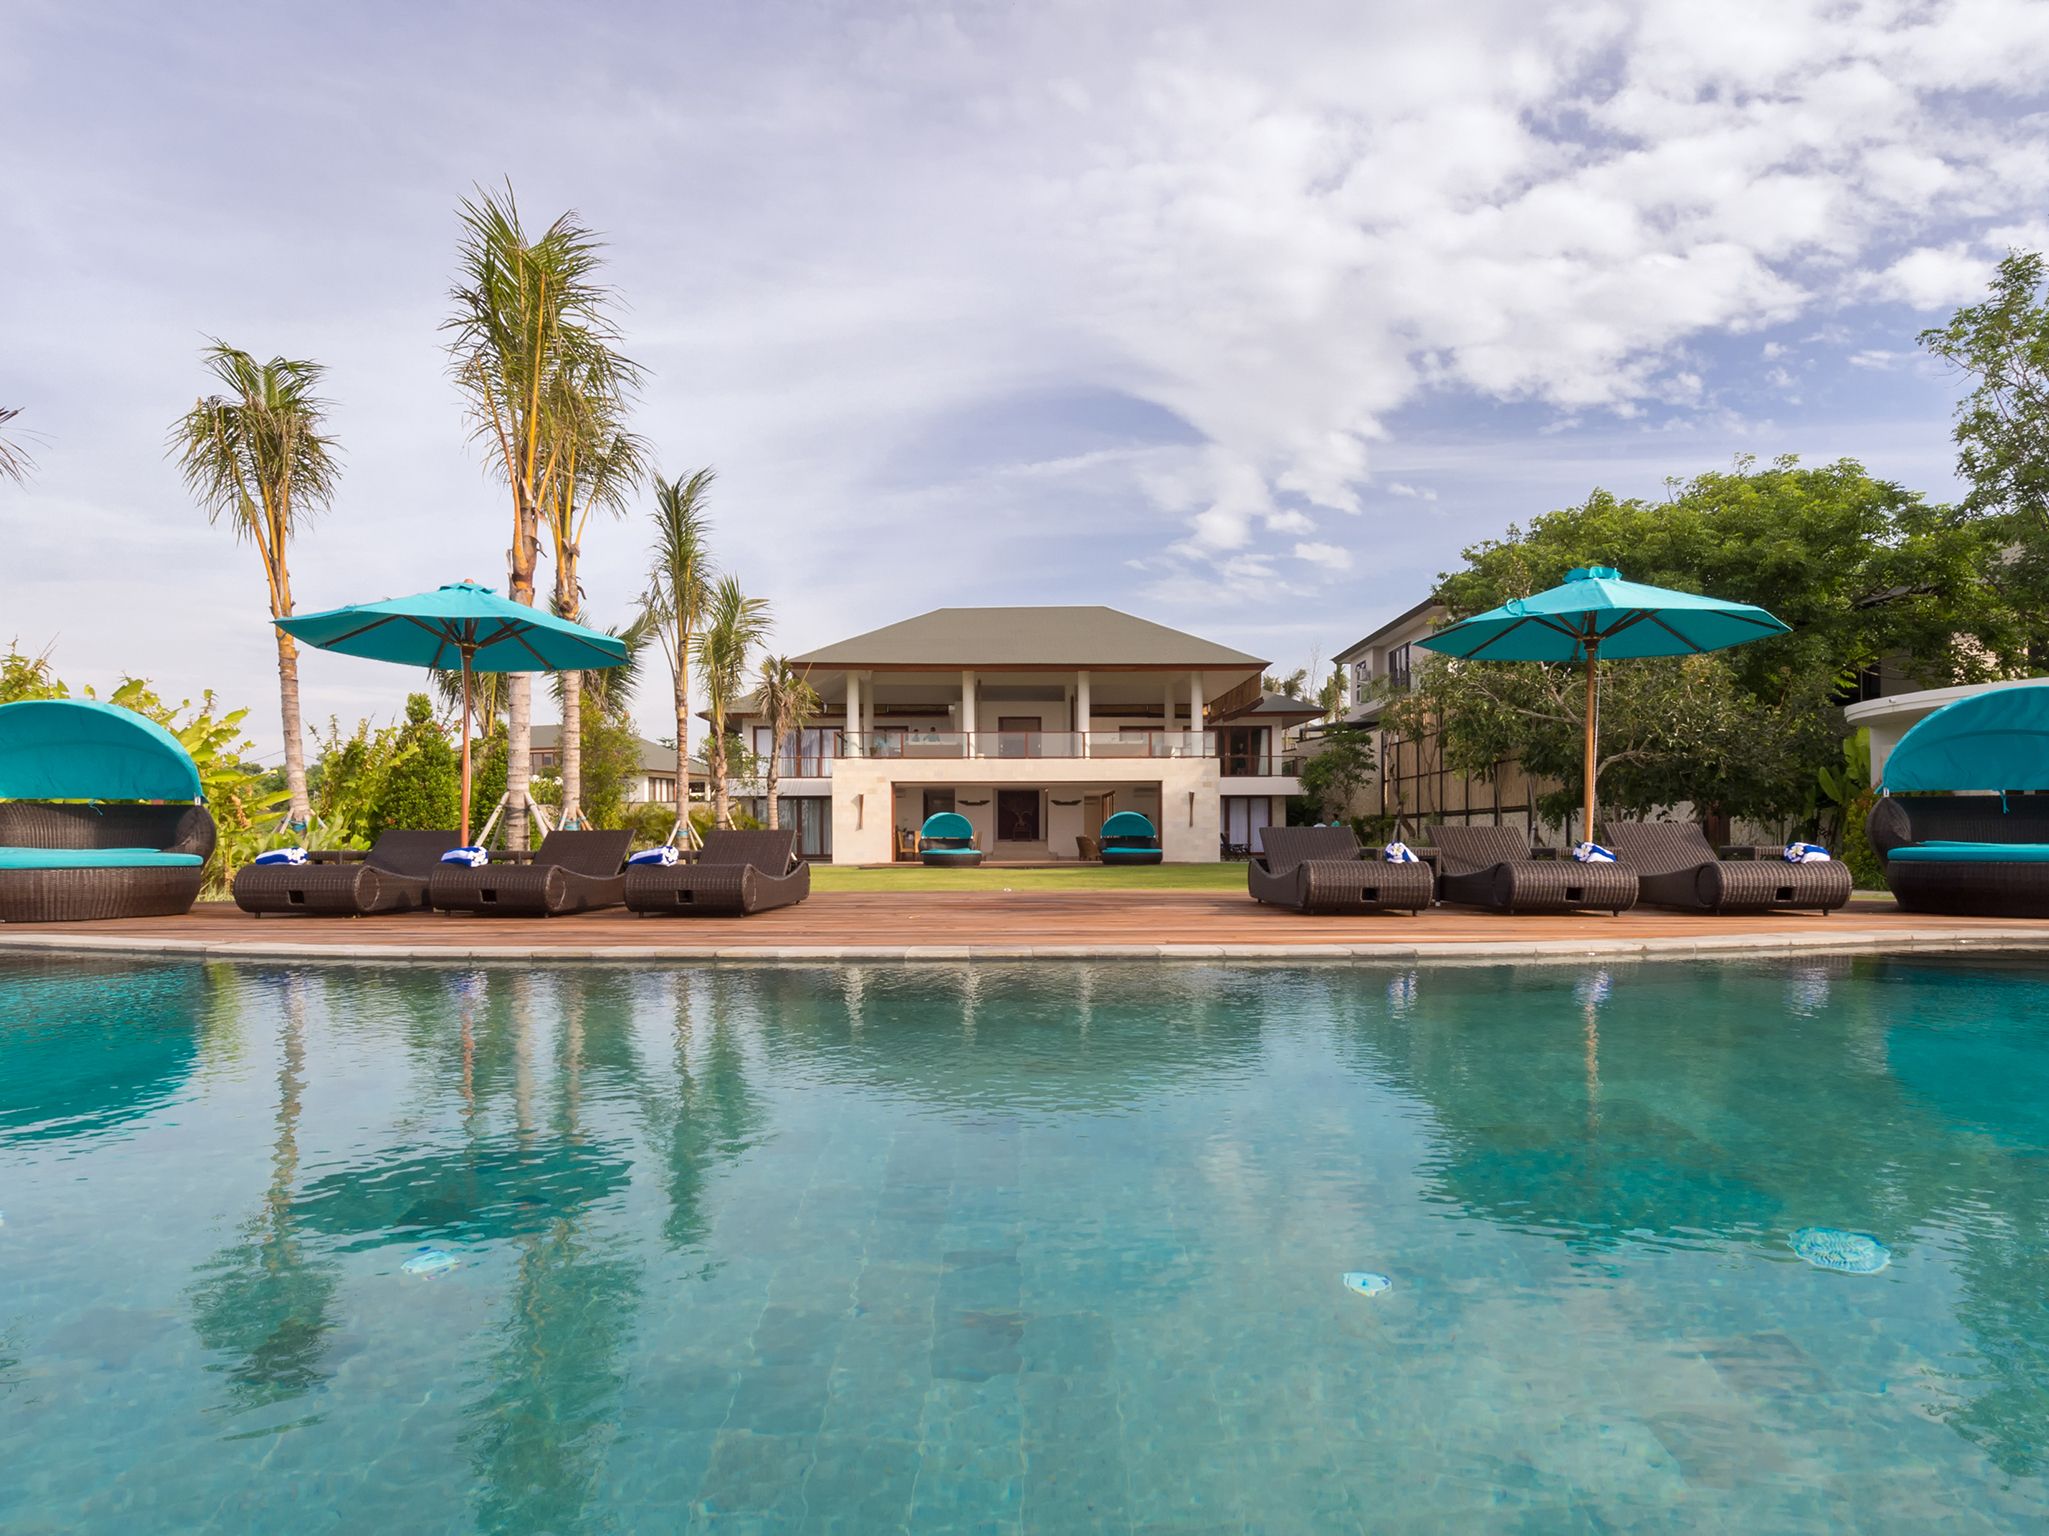 Pandawa Cliff Estate - Villa Rose - The villa viewed from the pool